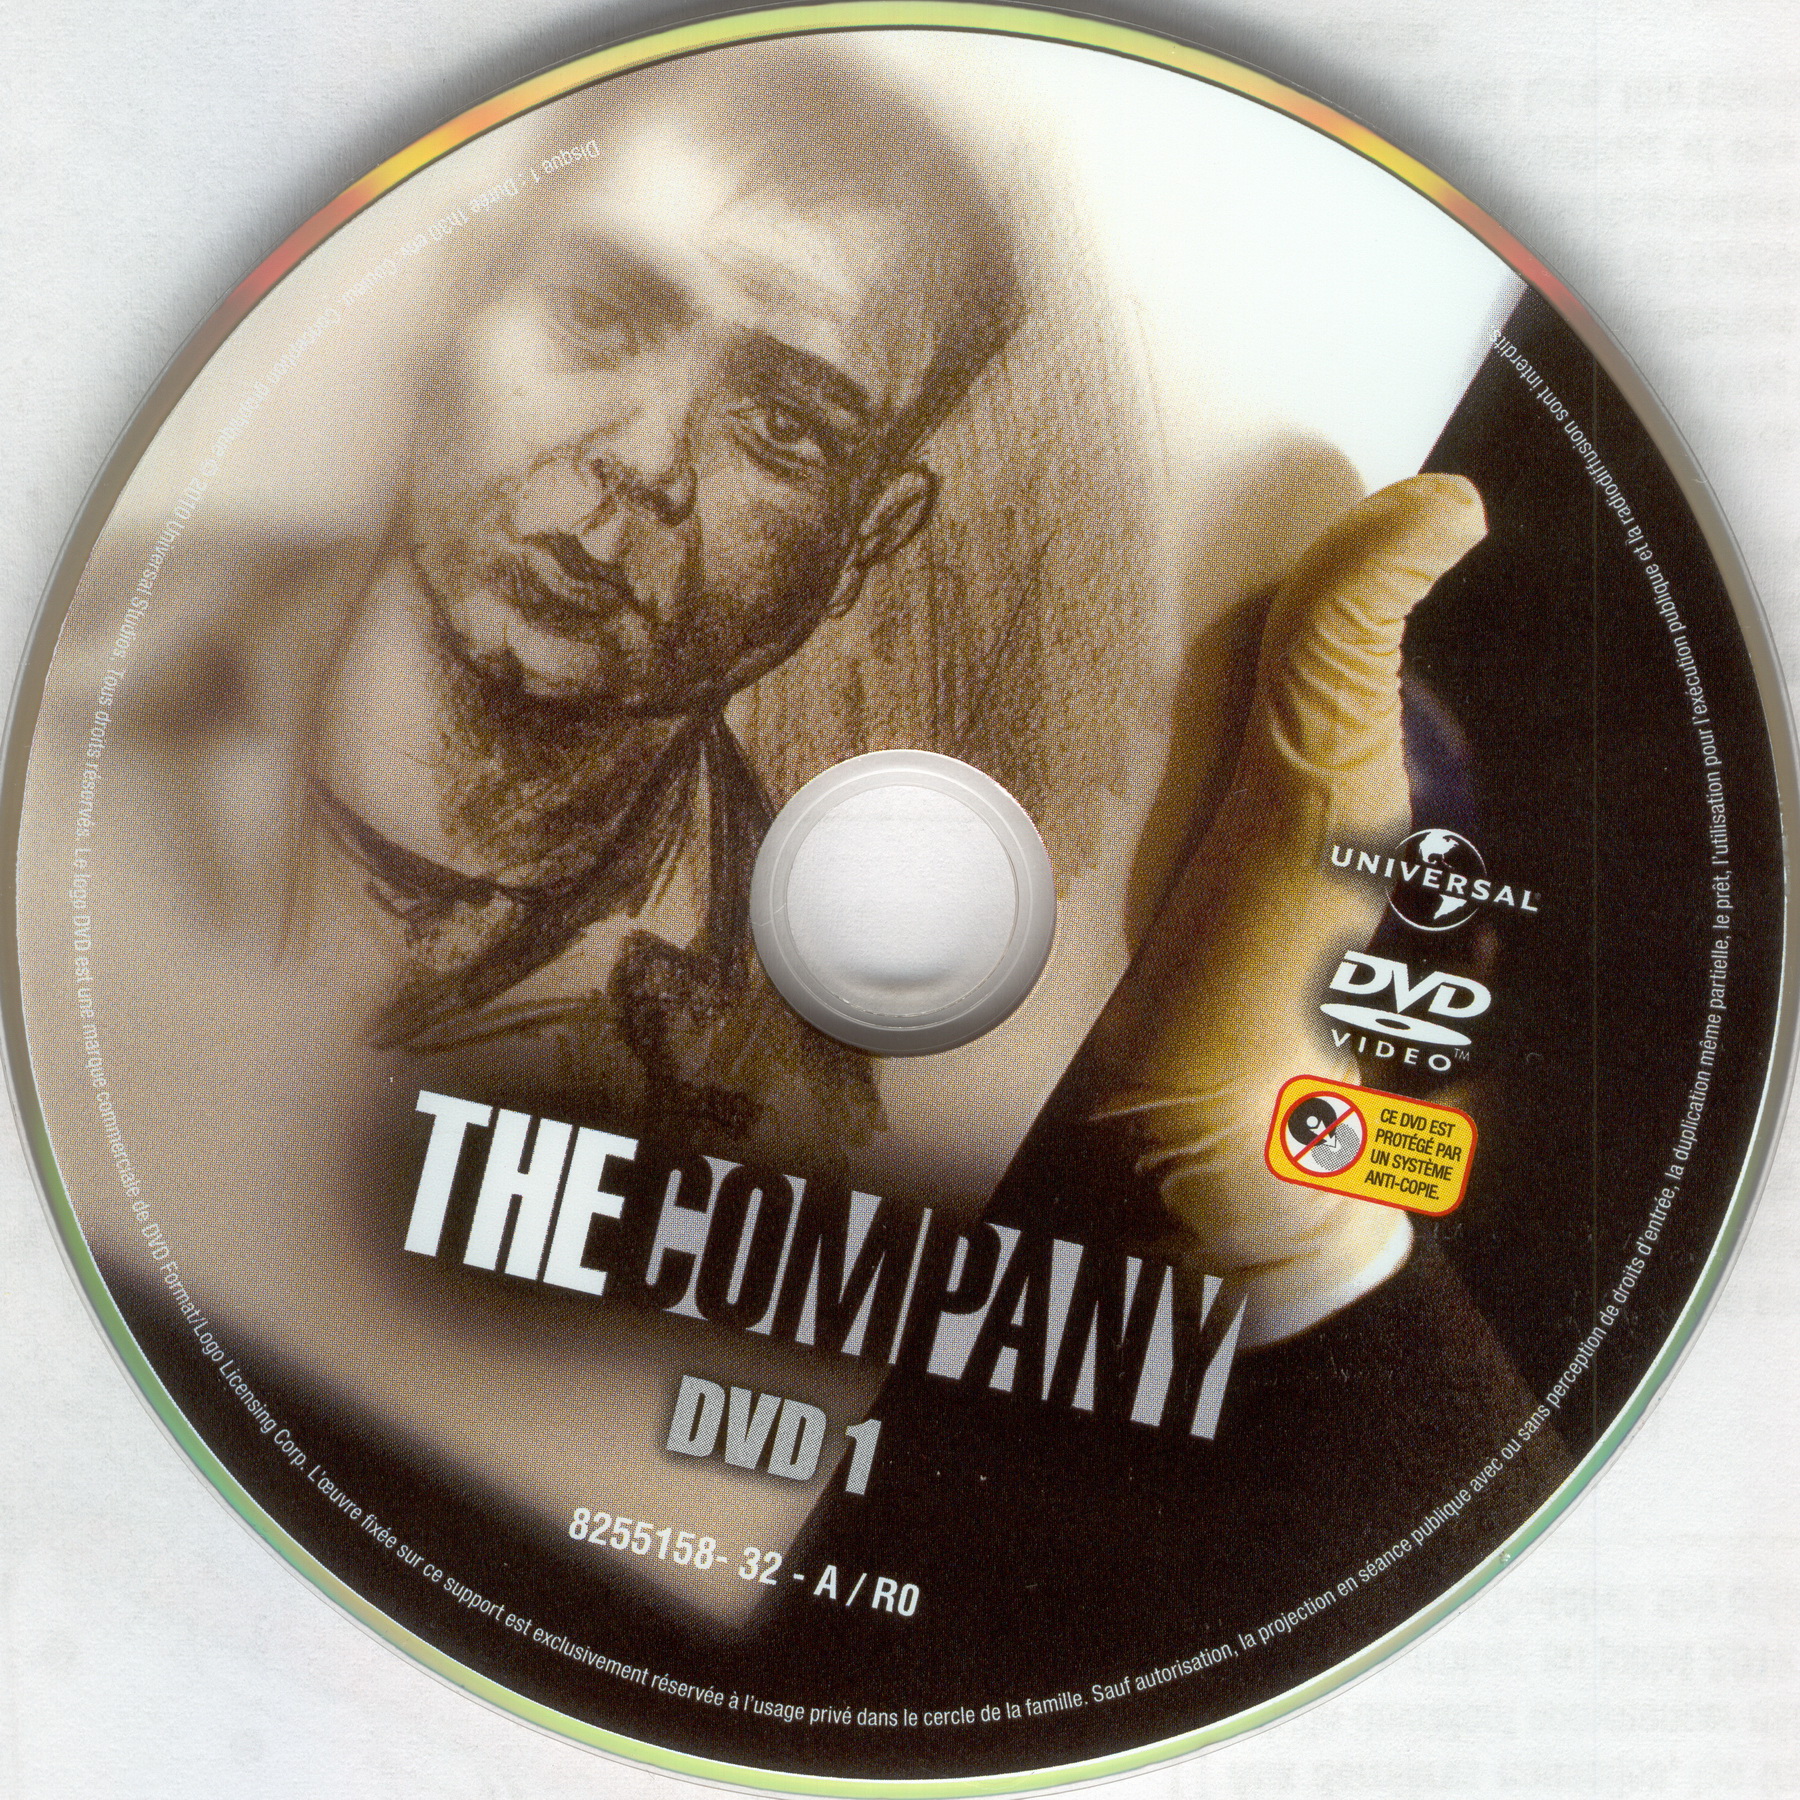 The company DISC 1